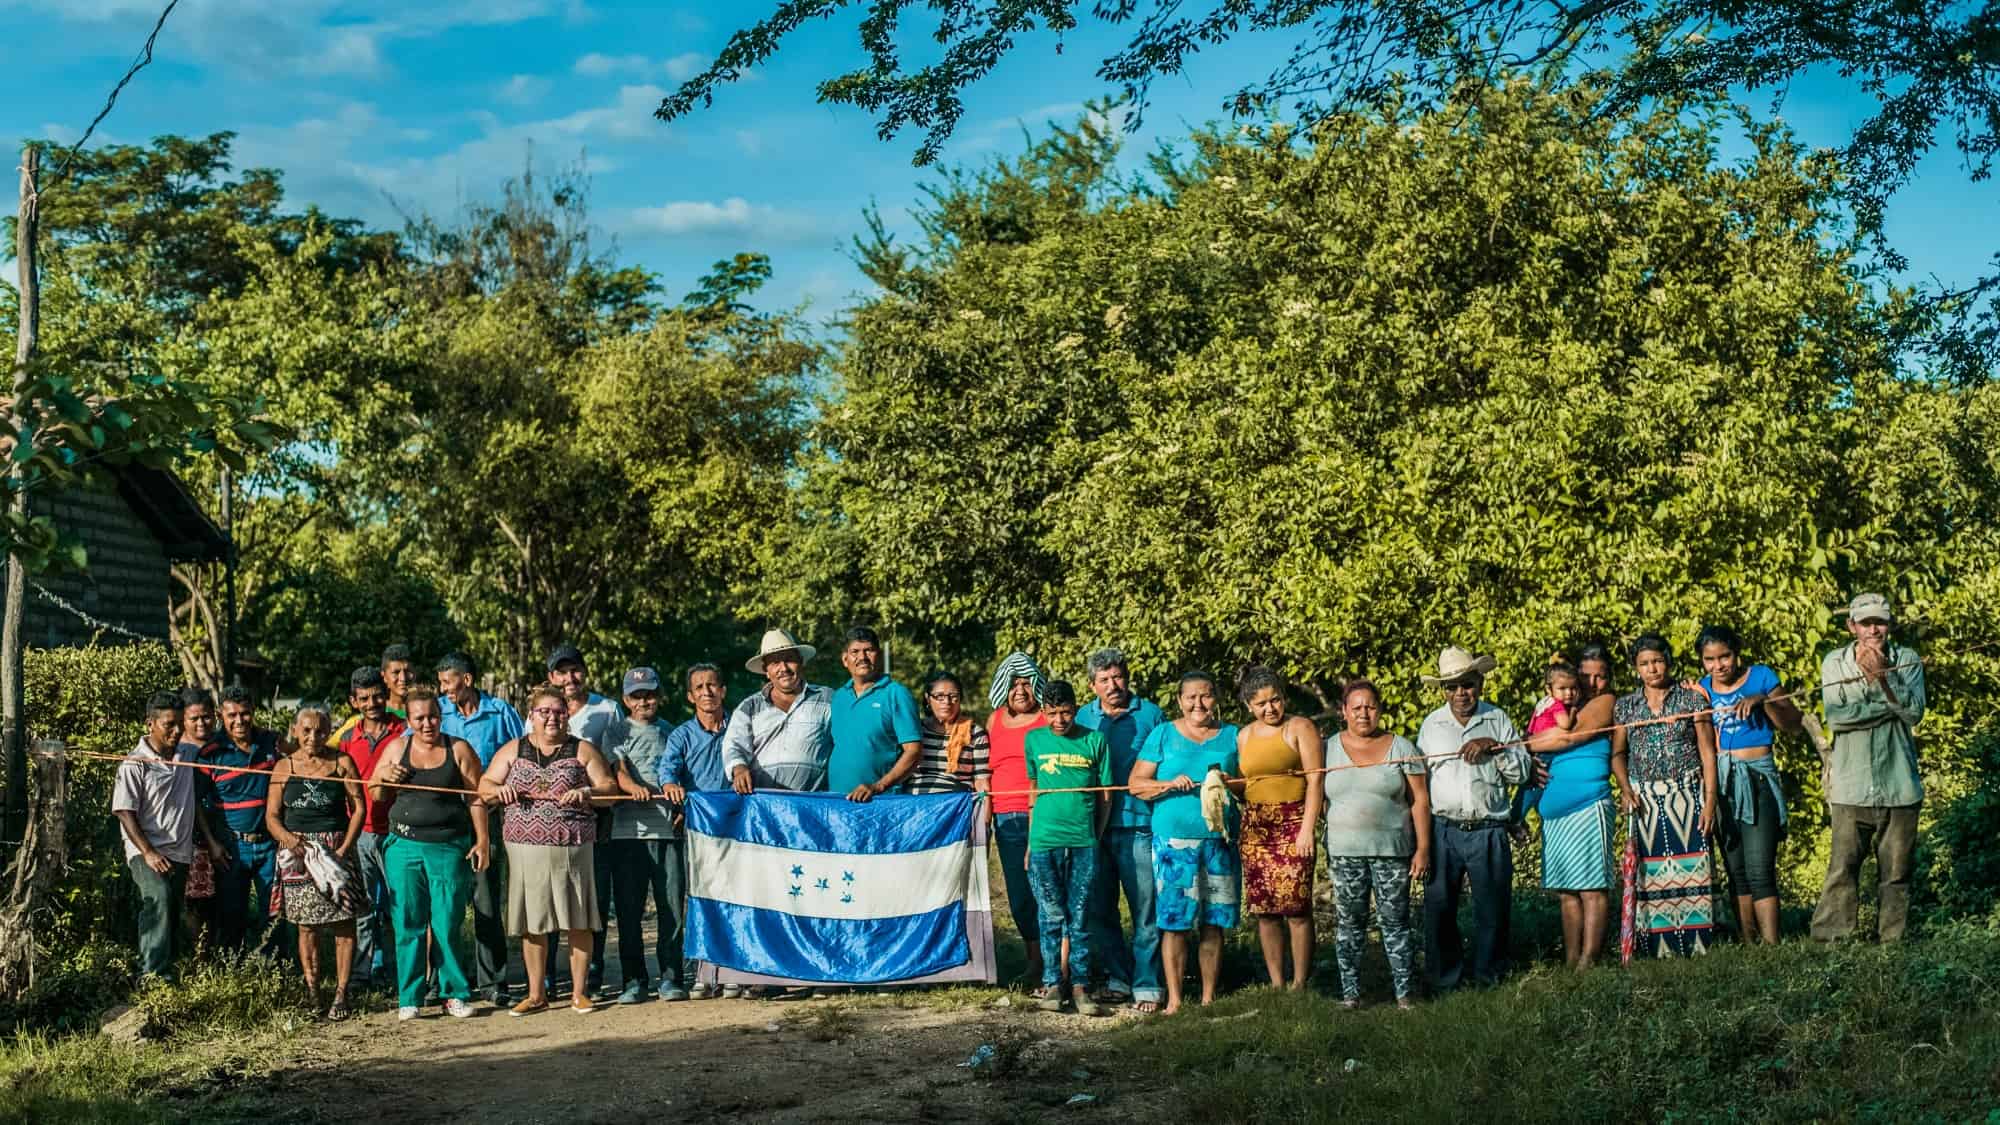 The MASSVIDA group, which supports indigenous communities, stand together in Southern Honduras